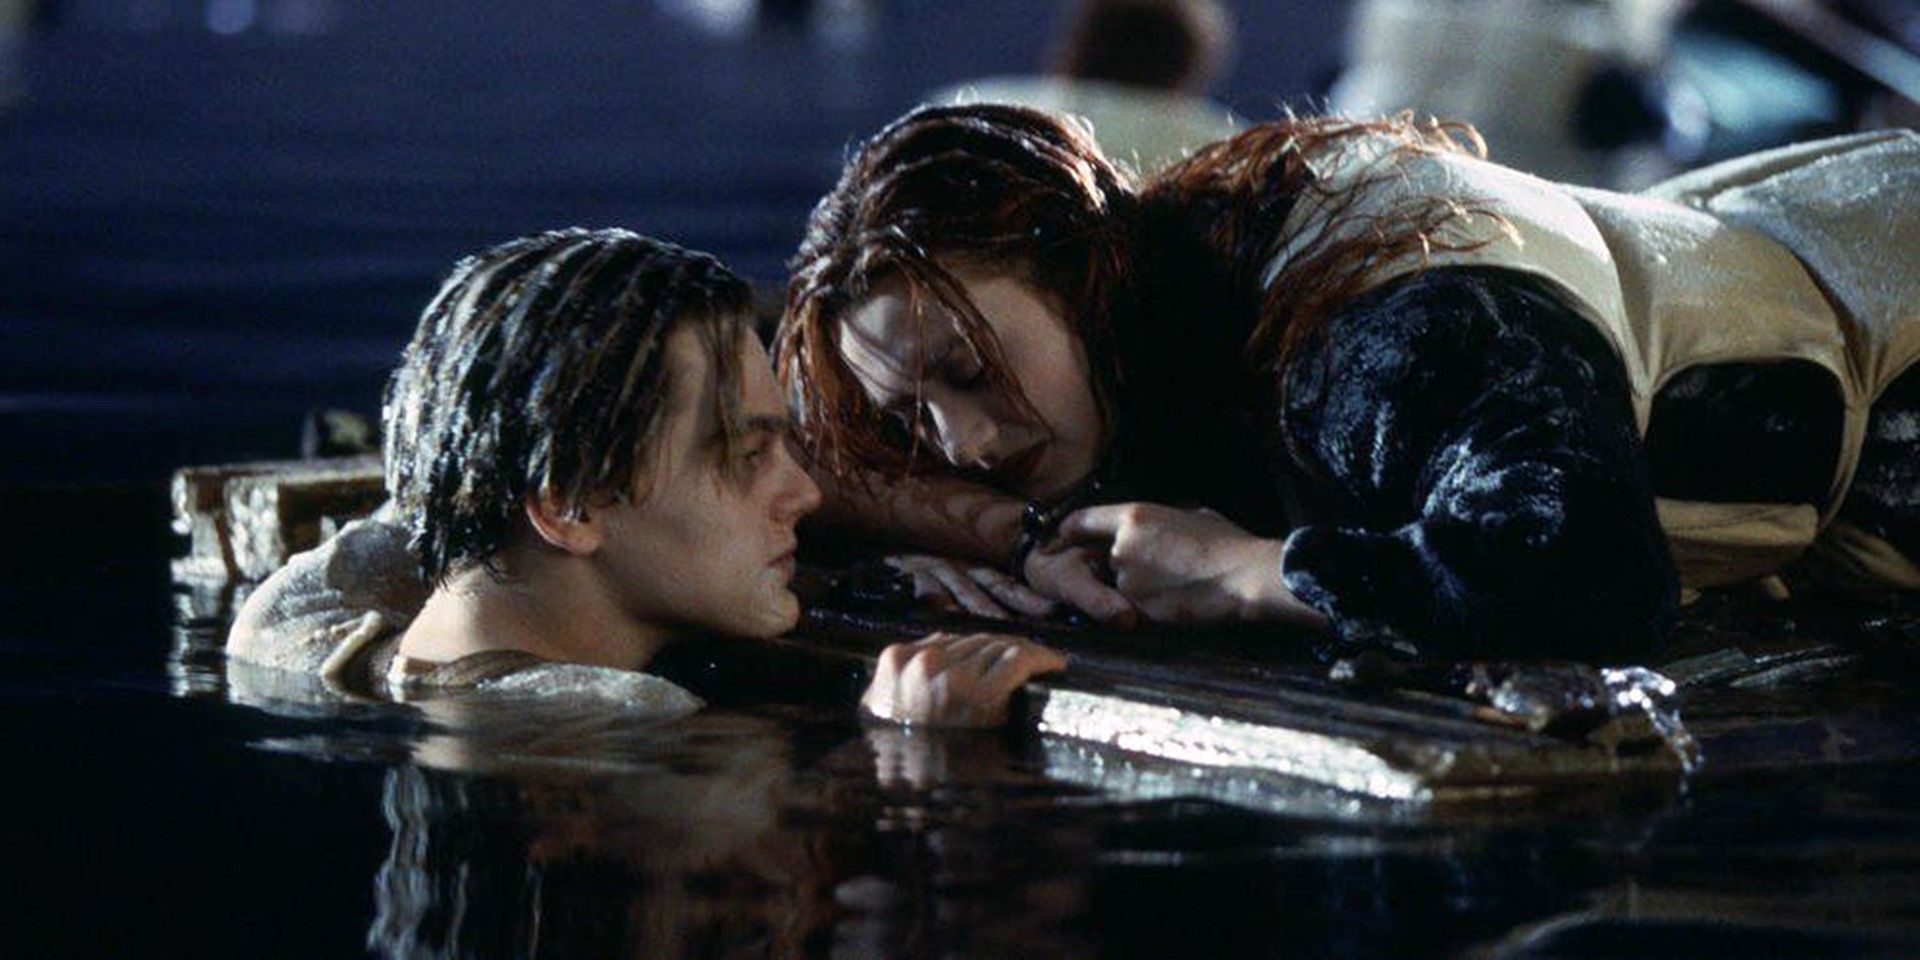 Jack in the water and Rose on the door in Titanic